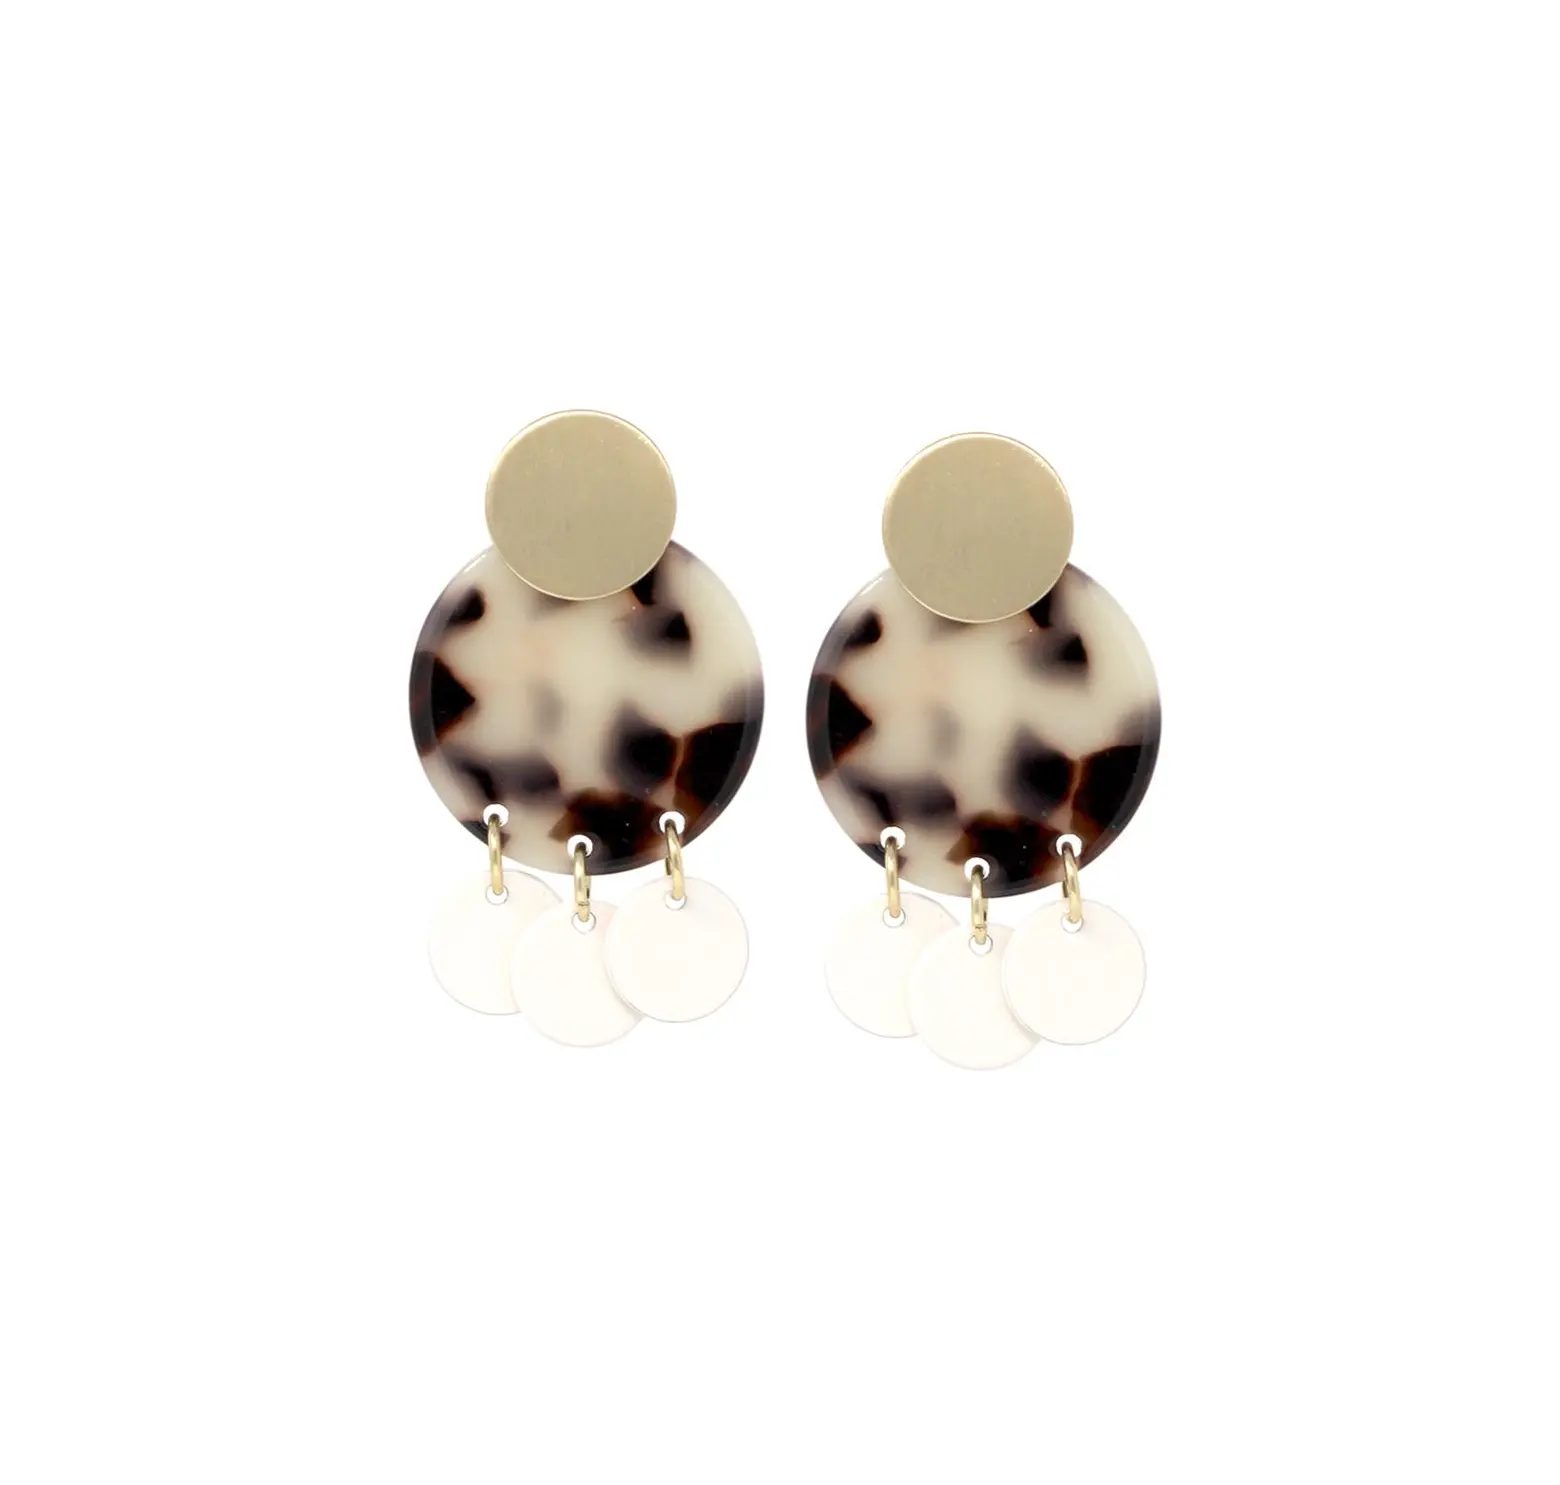 Colorful Resin Earring Jewelry High Quality Women Earrings Dangling Luxury Accessories India Manufacture